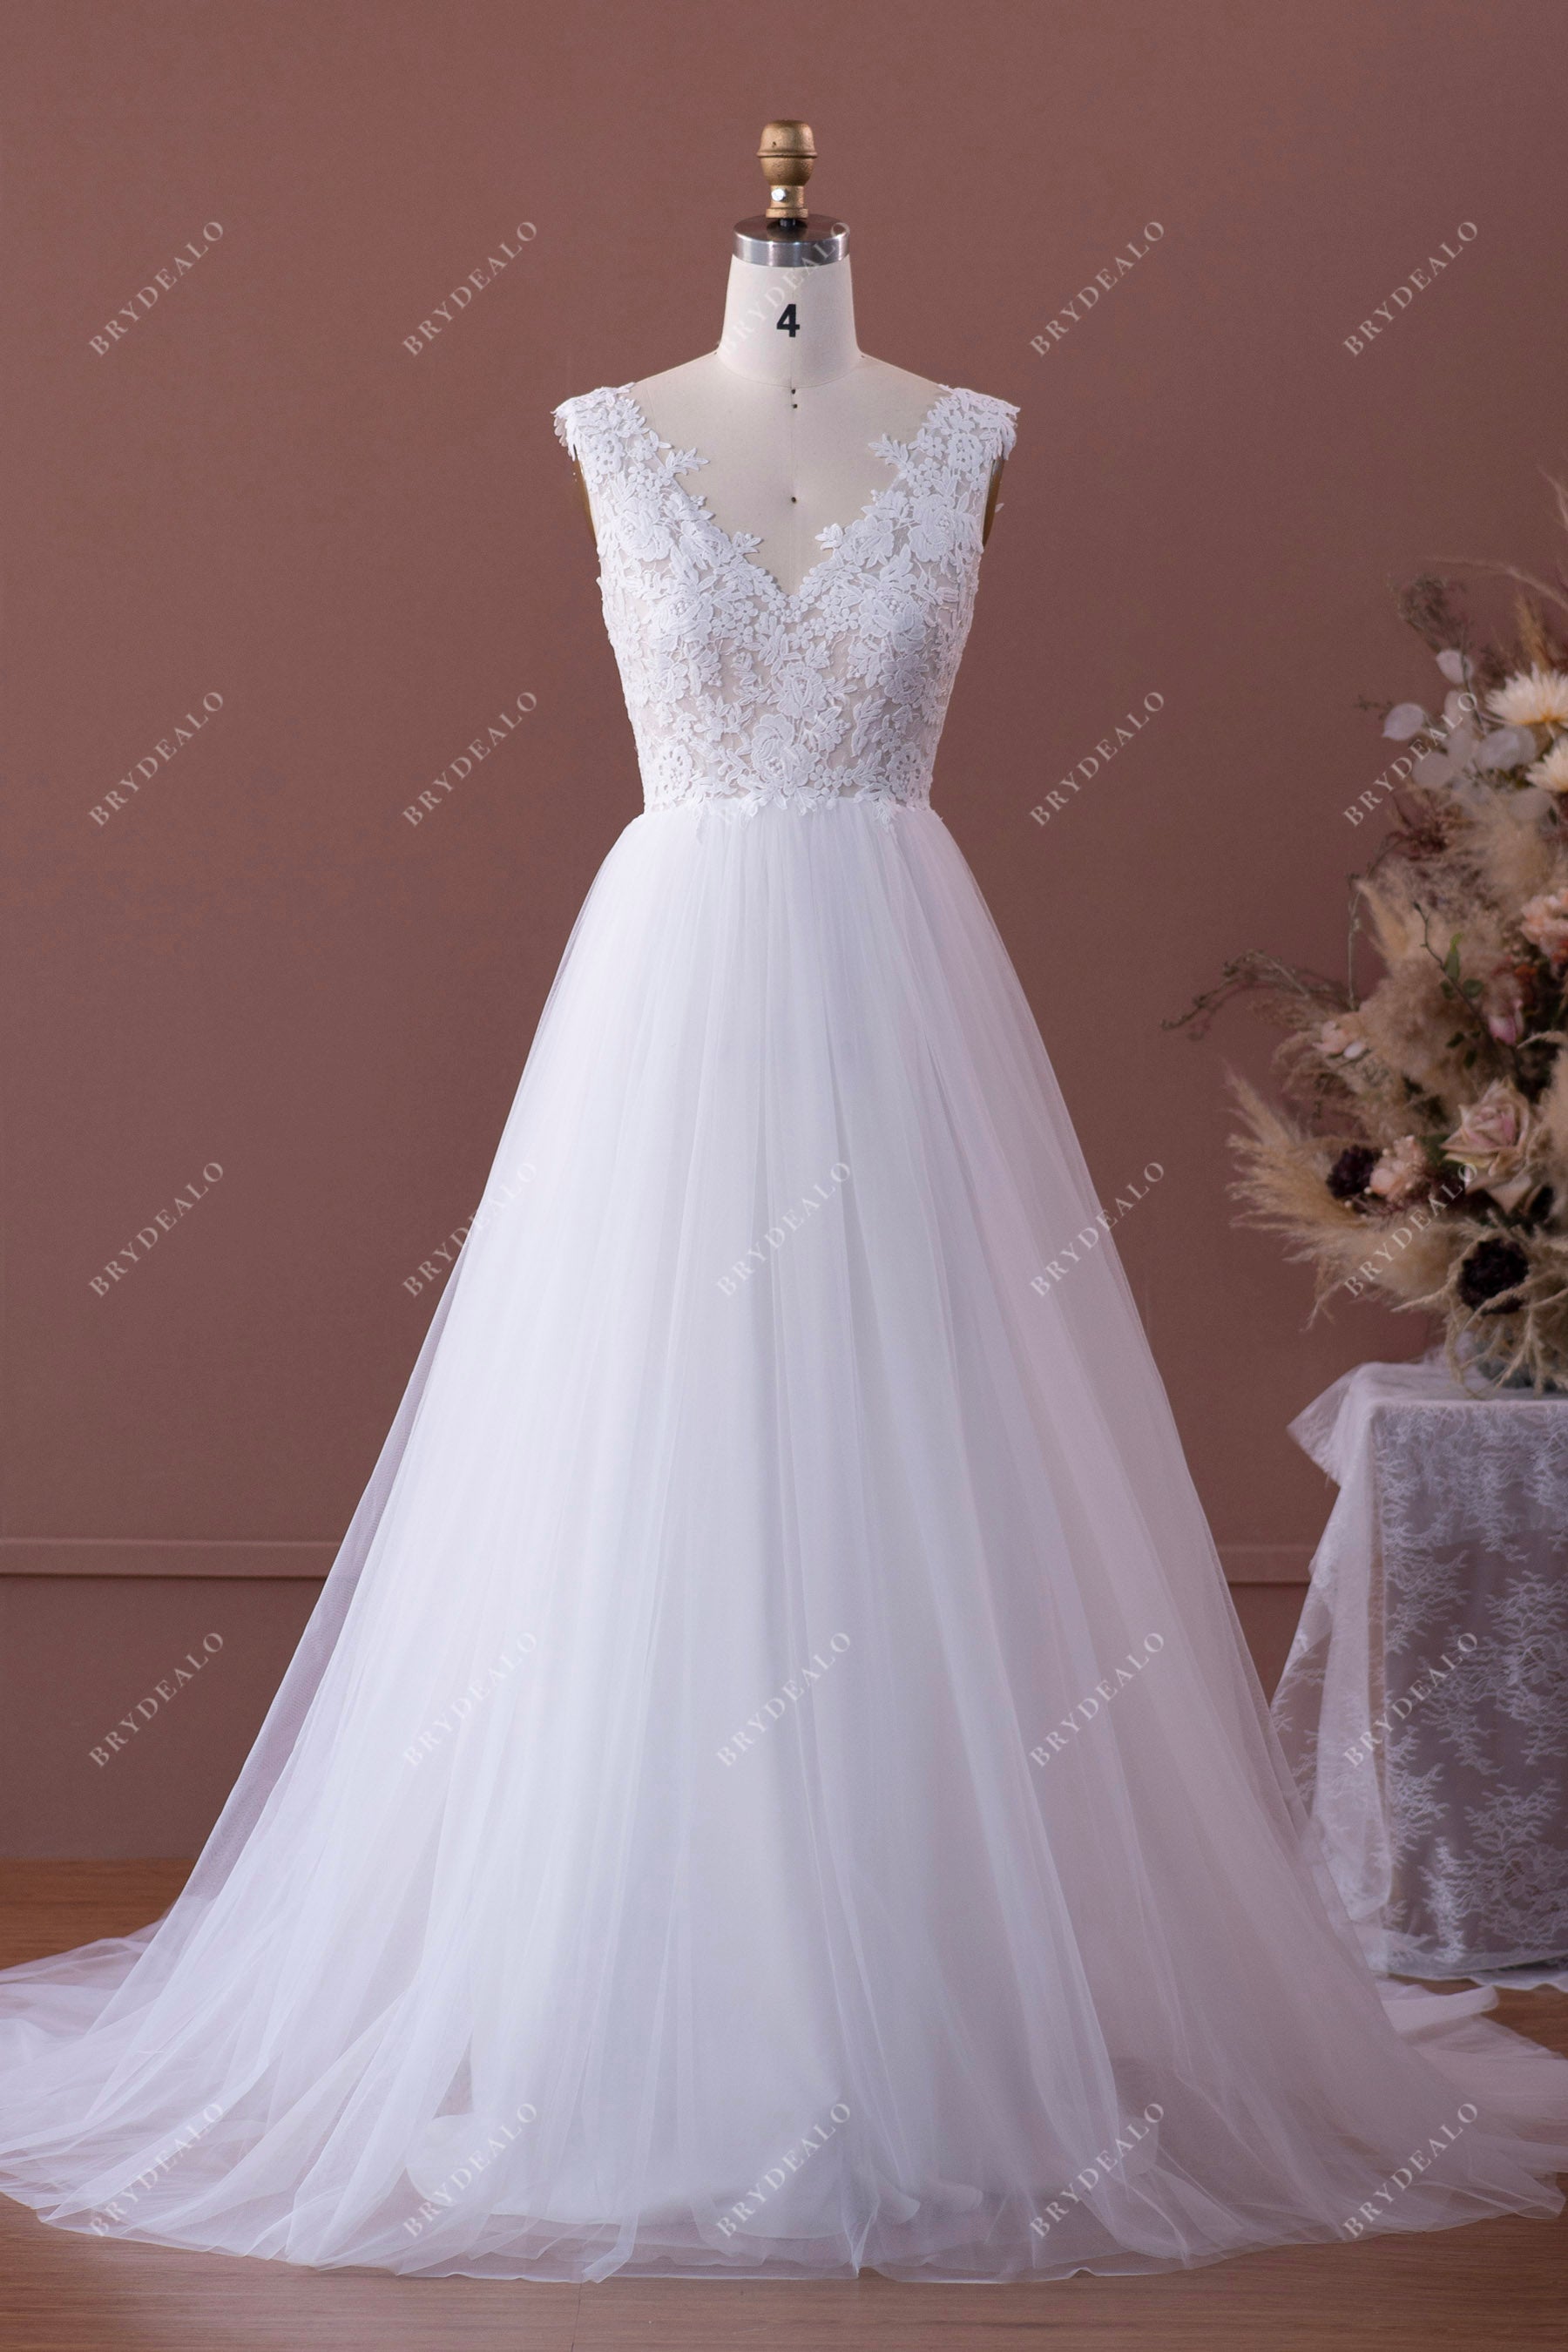 Chic Flower Lace Tulle A-line Long Wedding Dress